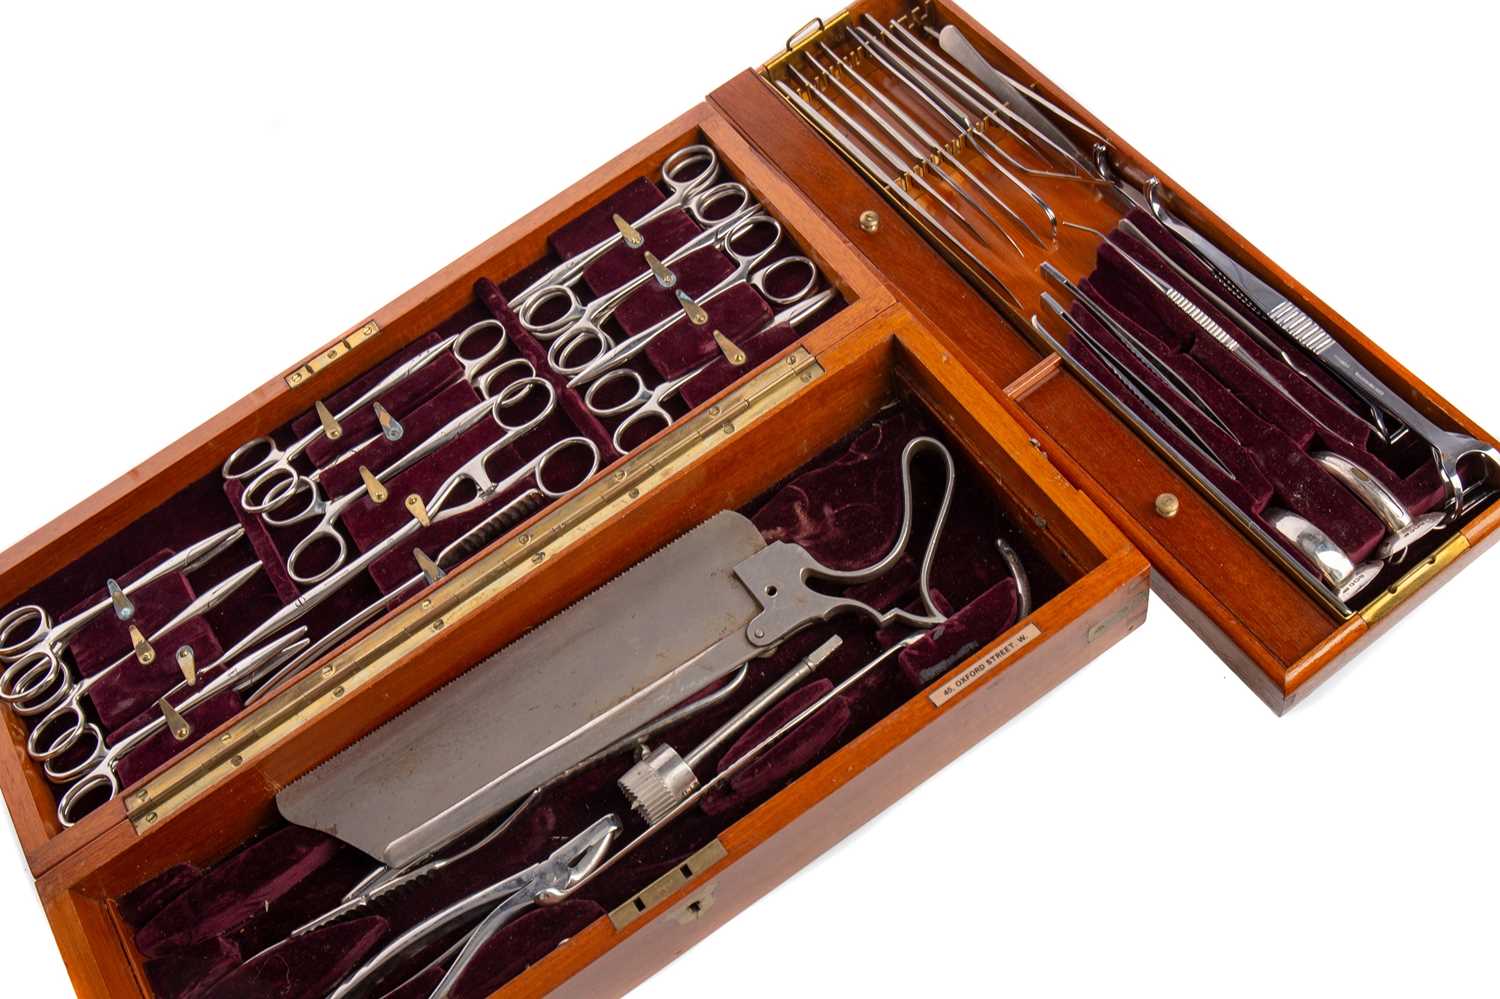 Lot 147 - A SET OF MID-20TH CENTURY OPERATION INSTRUMENTS BY W. H. BAILEY & SON LTD OF OXFORD STREET